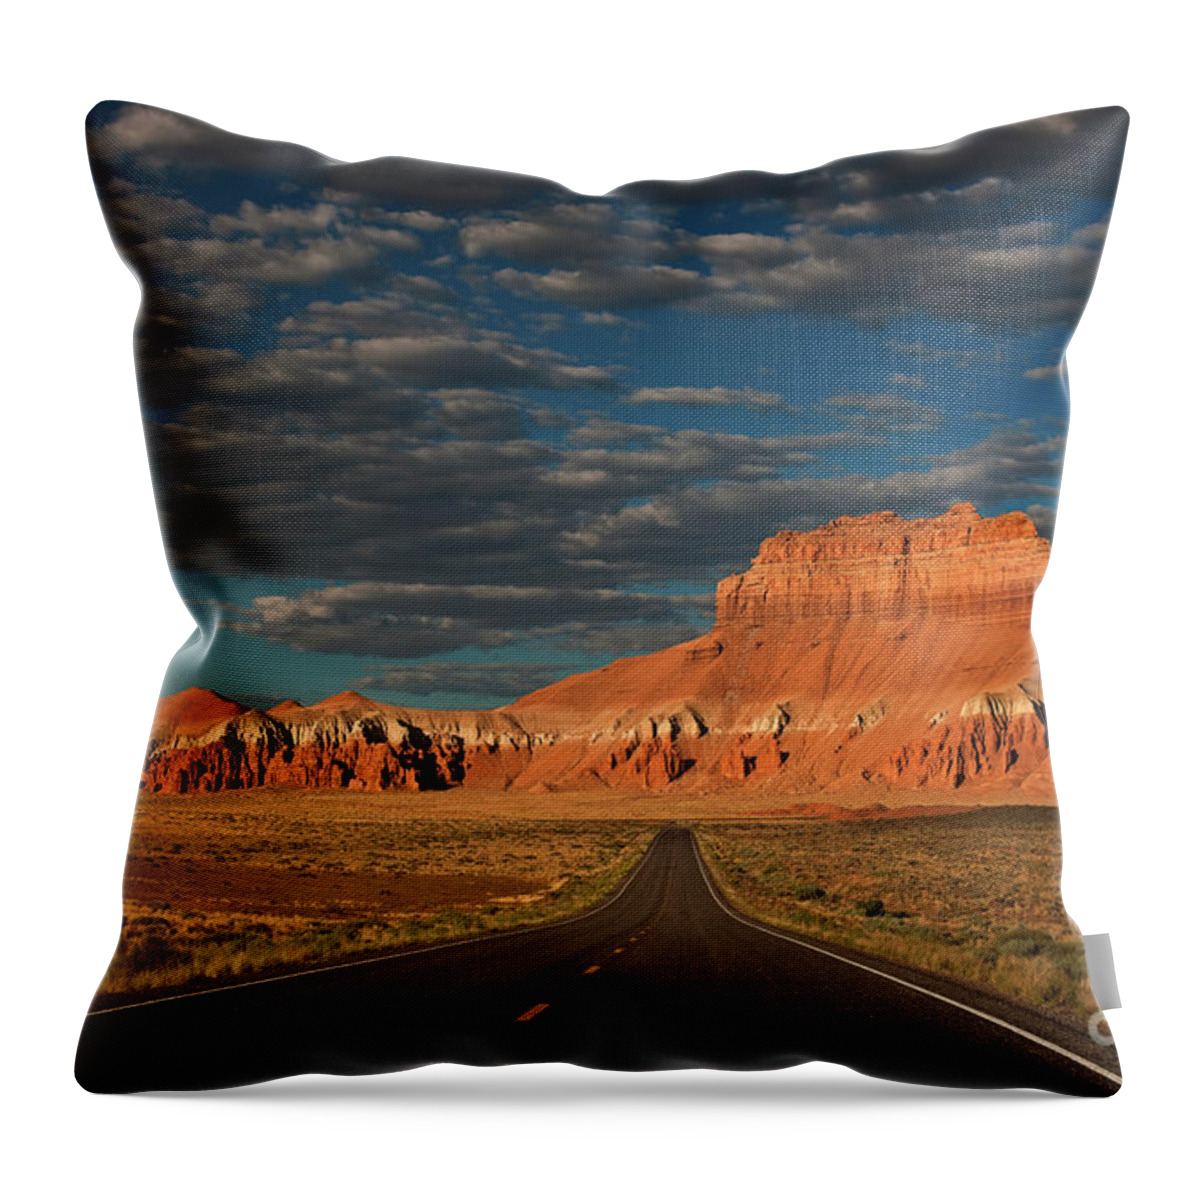 North America Throw Pillow featuring the photograph Wild Horse Butte And Road Goblin Valley Utah by Dave Welling